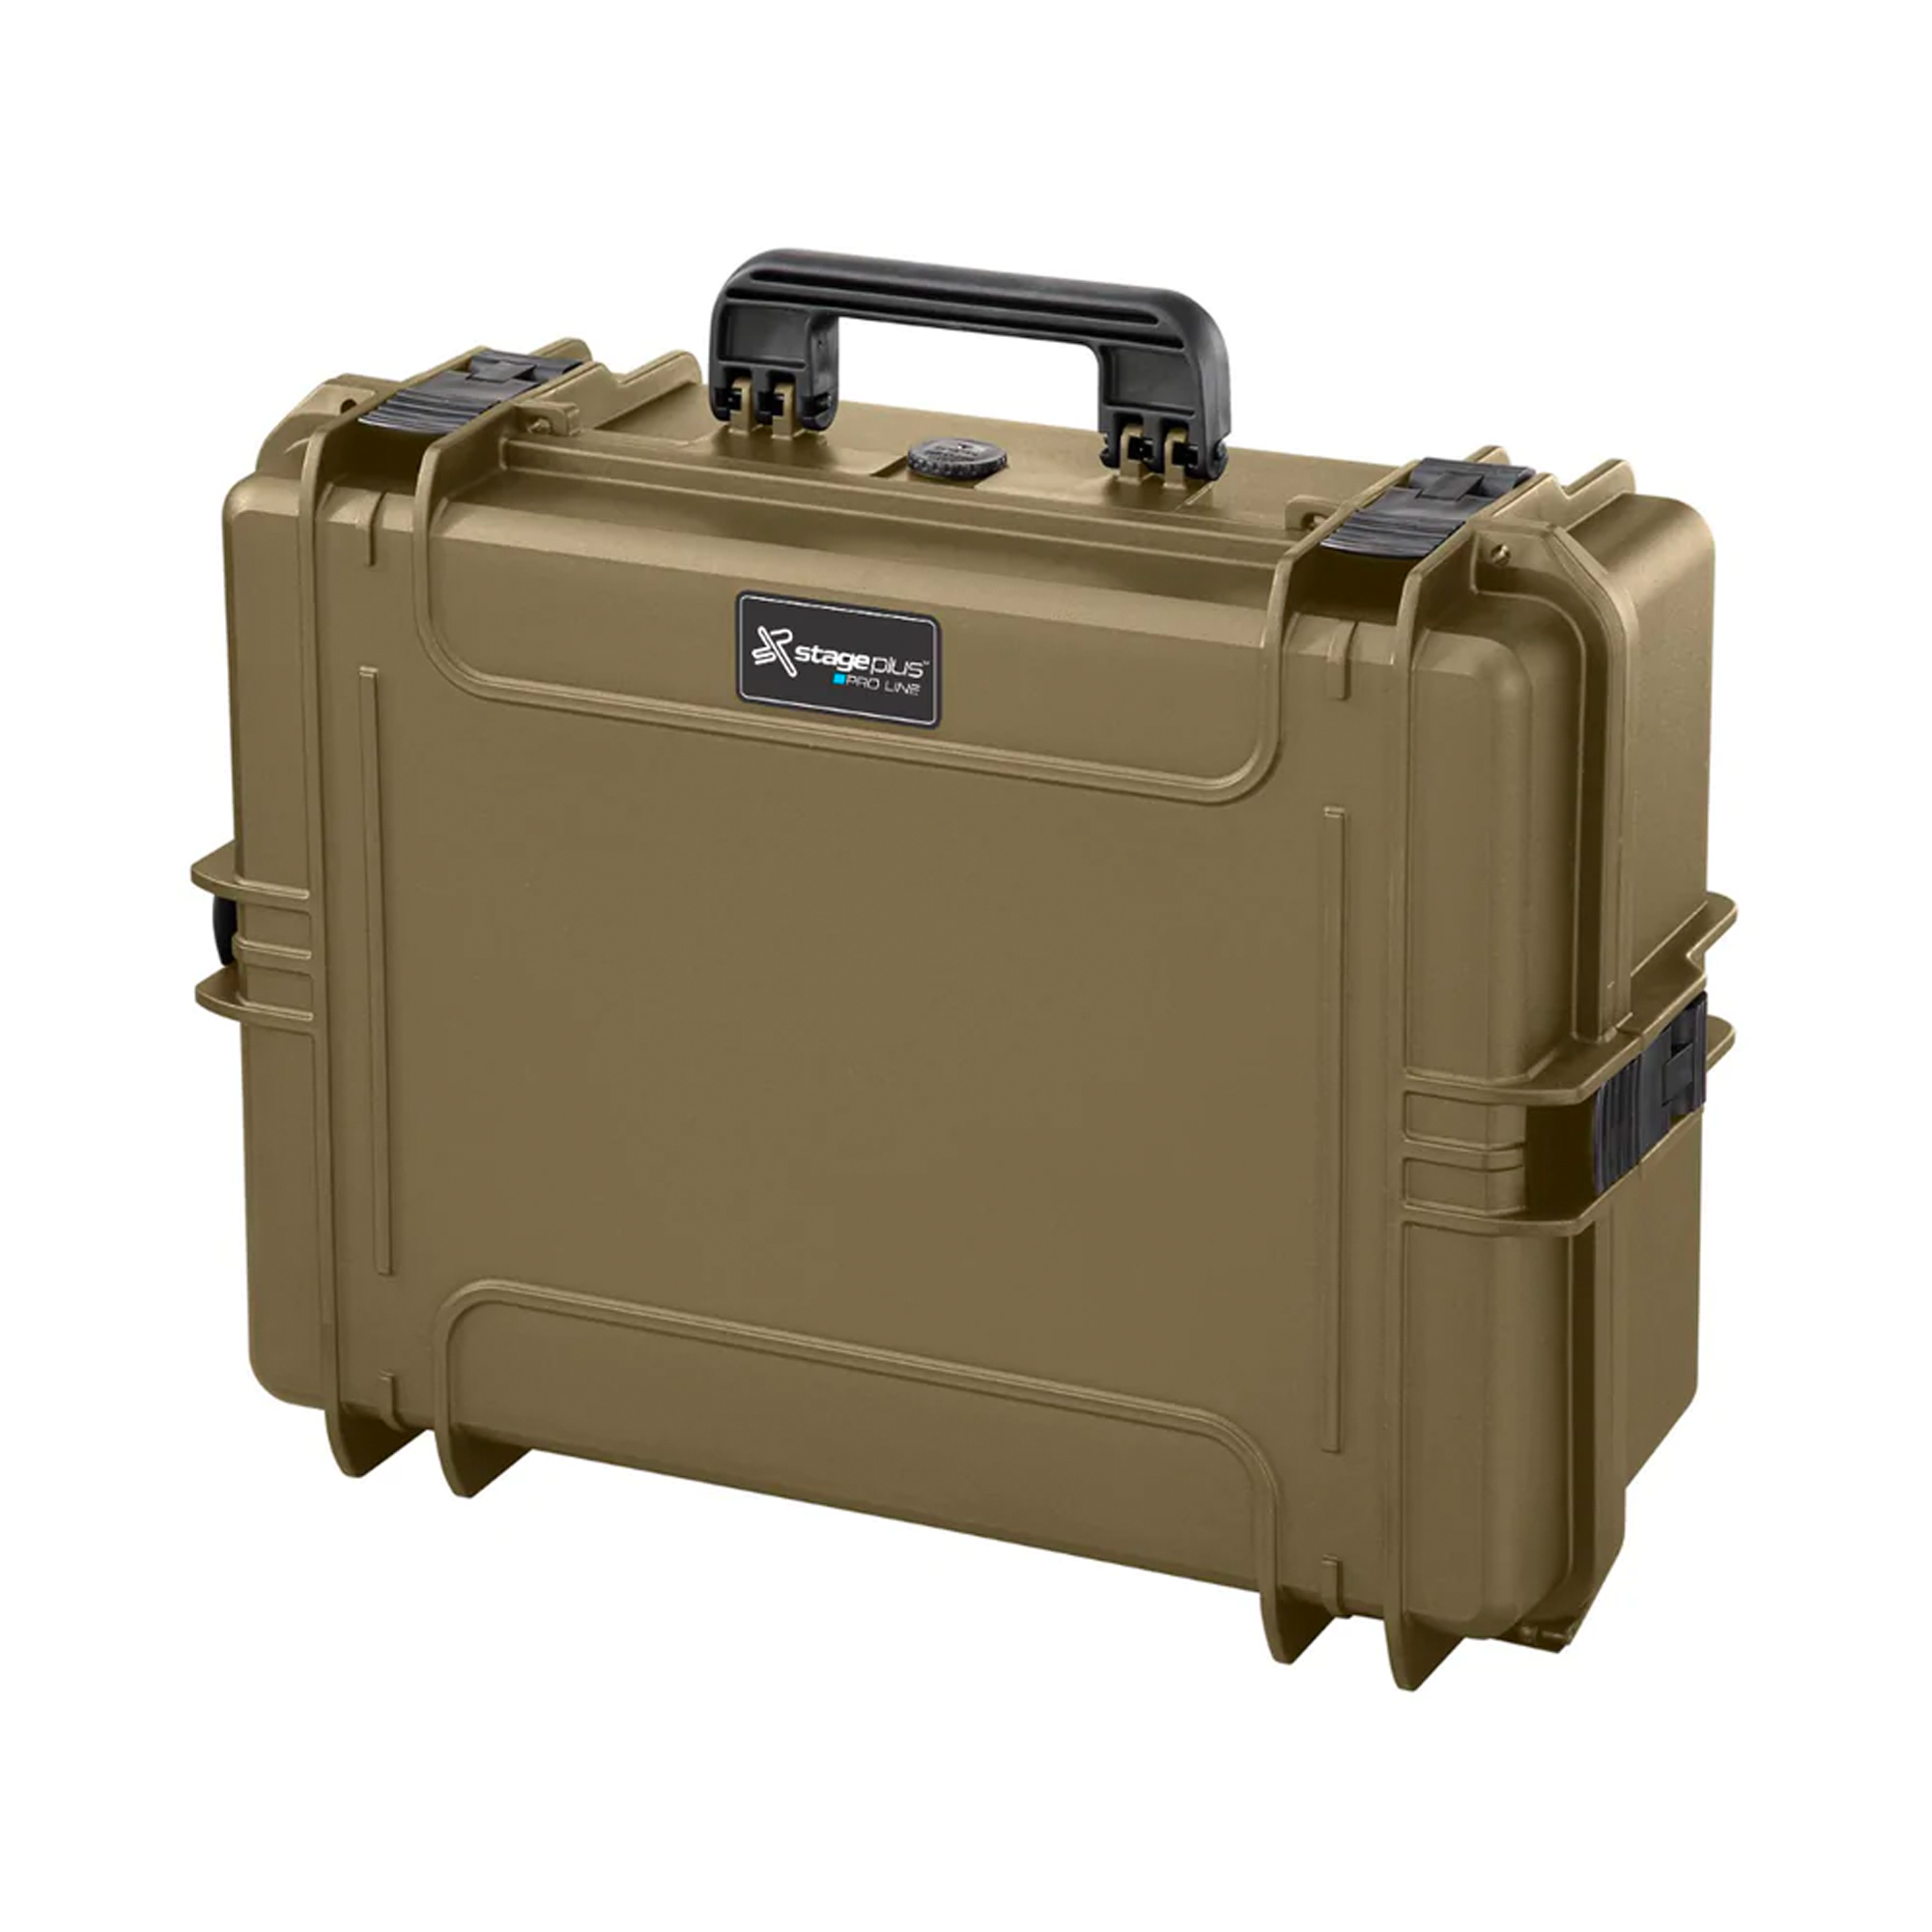 Stage Plus PRO 505HDS Sahara Carry Case, High Density Cubed Foam, ID: L500xW350xH194mm